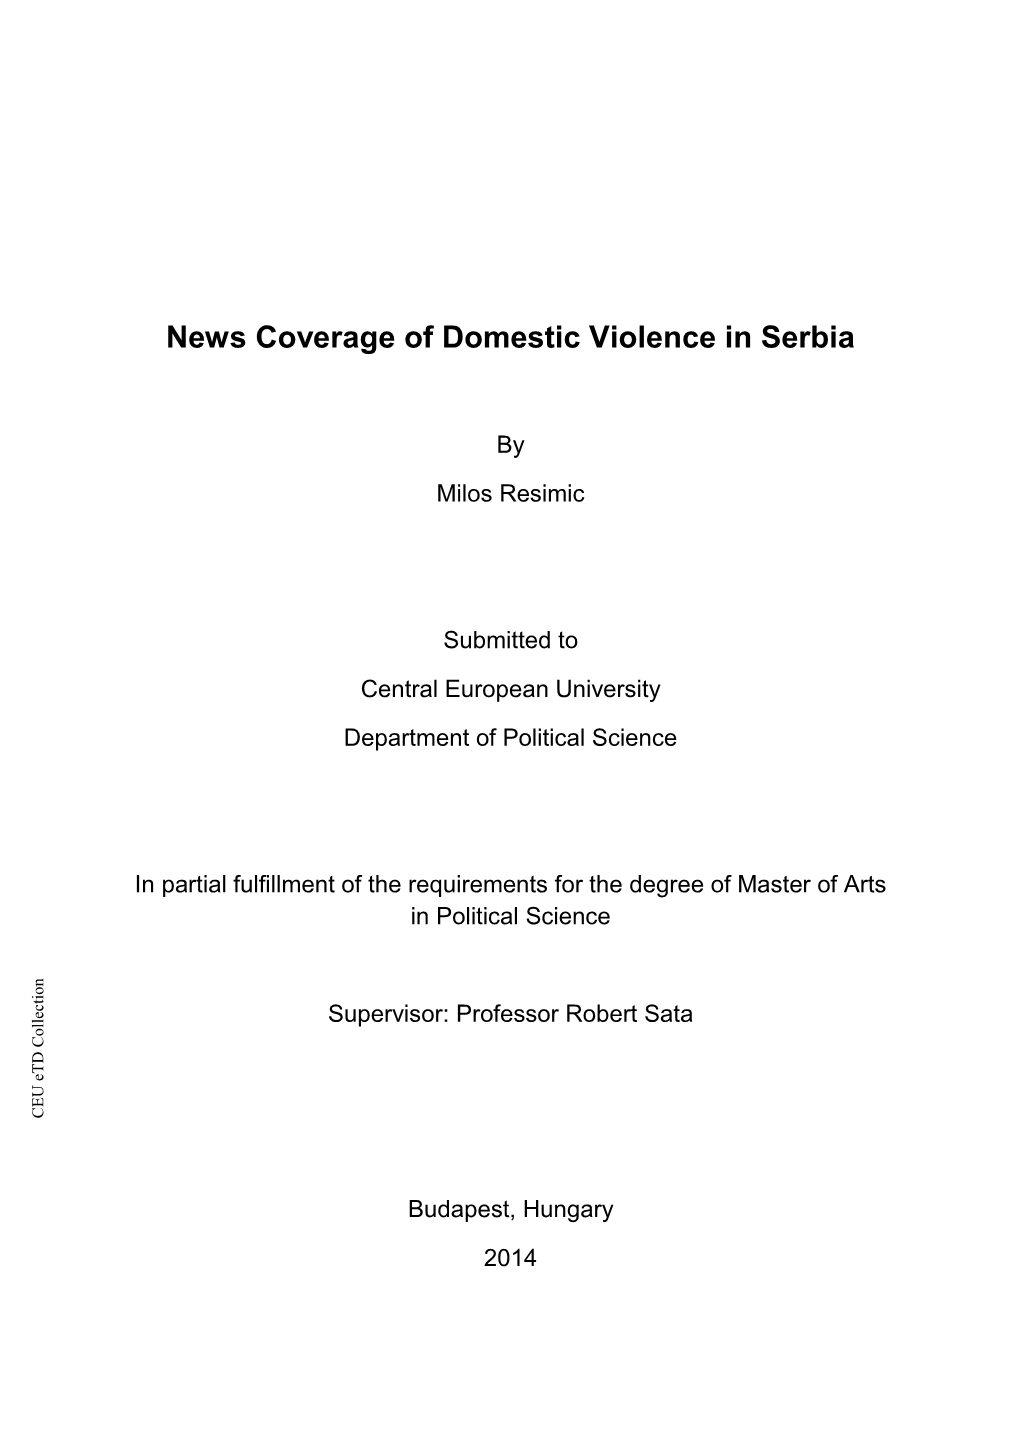 News Coverage of Domestic Violence in Serbia